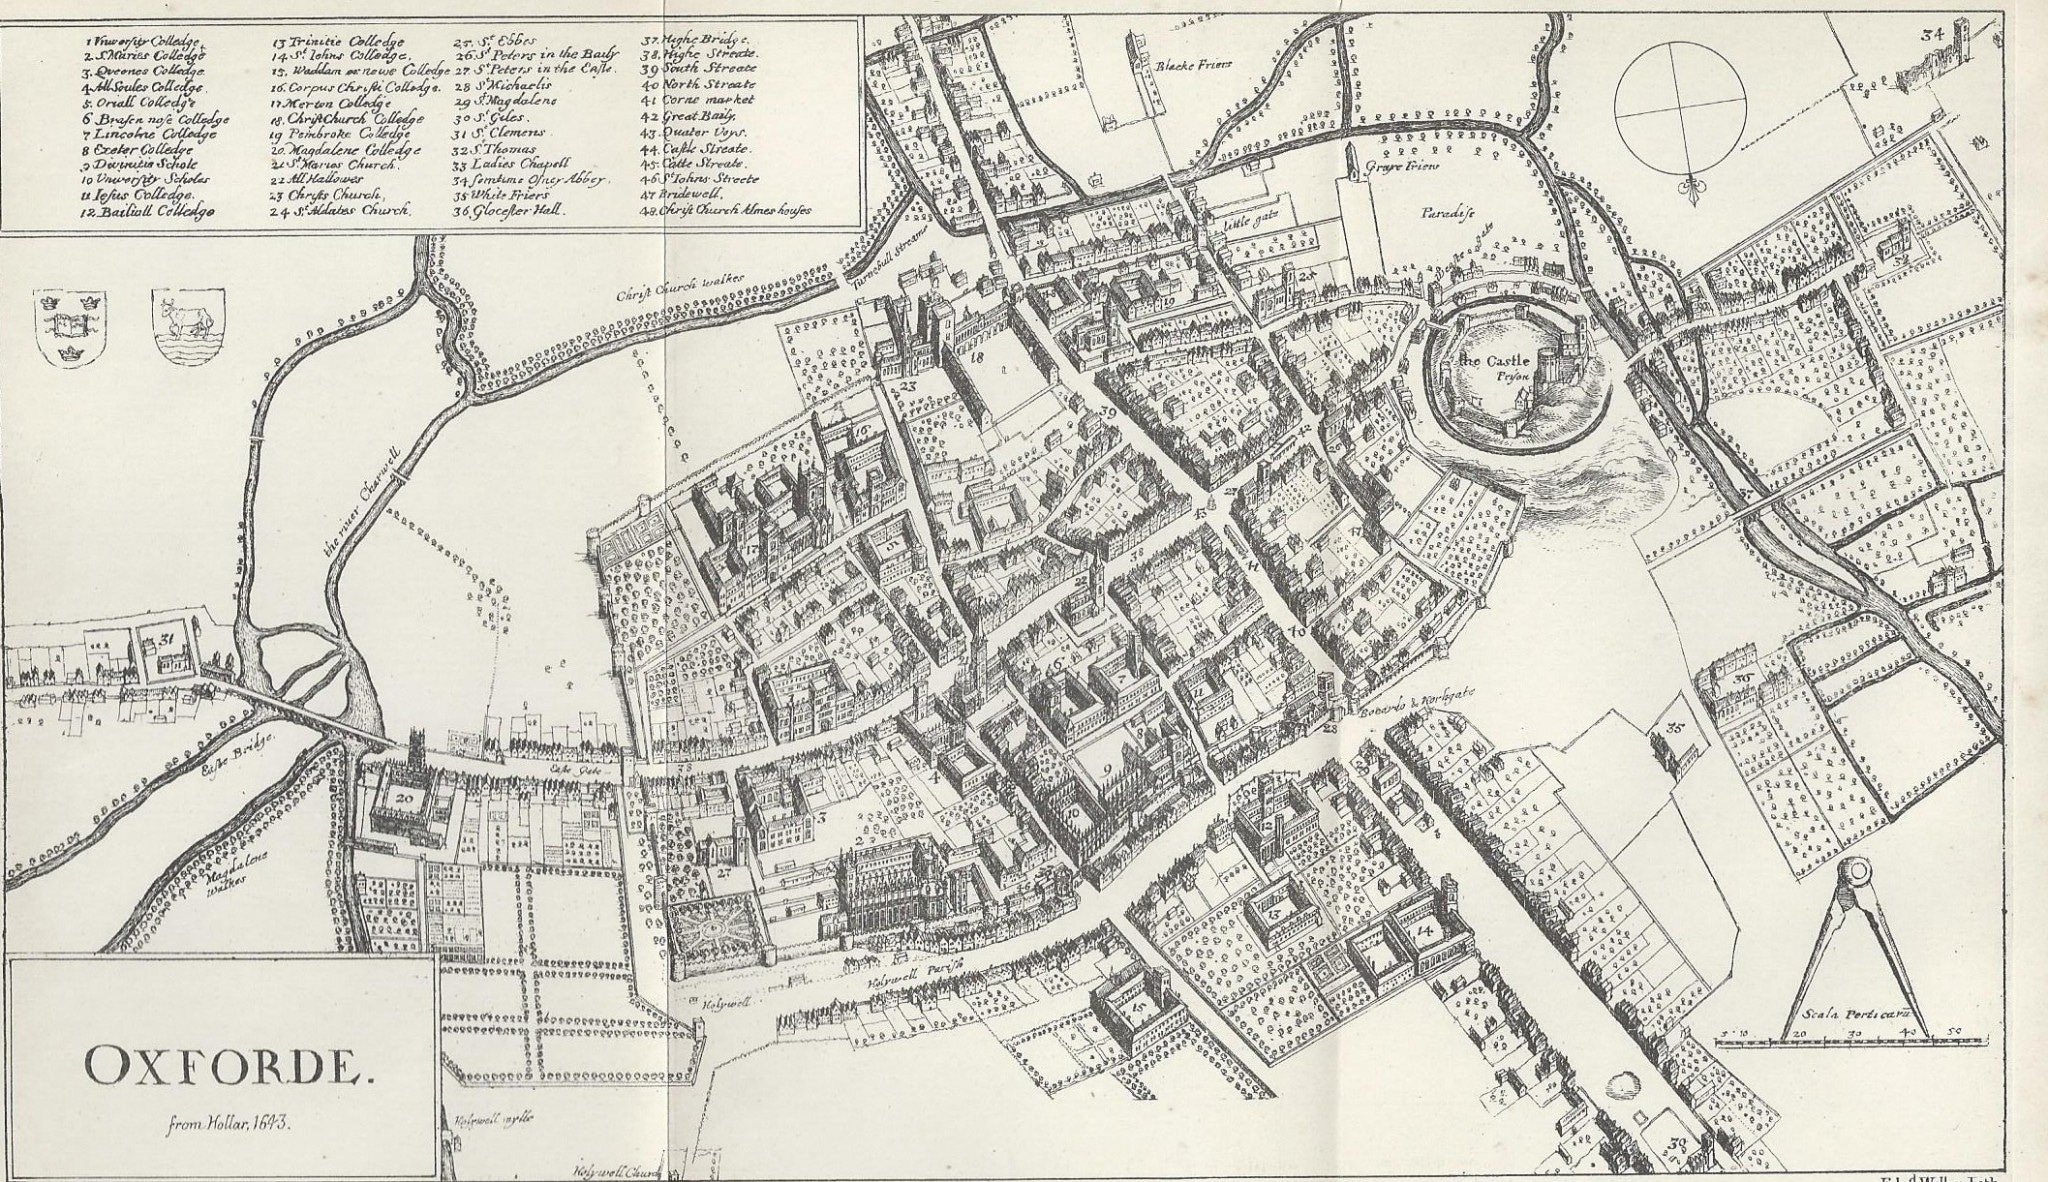 Old map of Oxford University and town dated 1643 17th Century